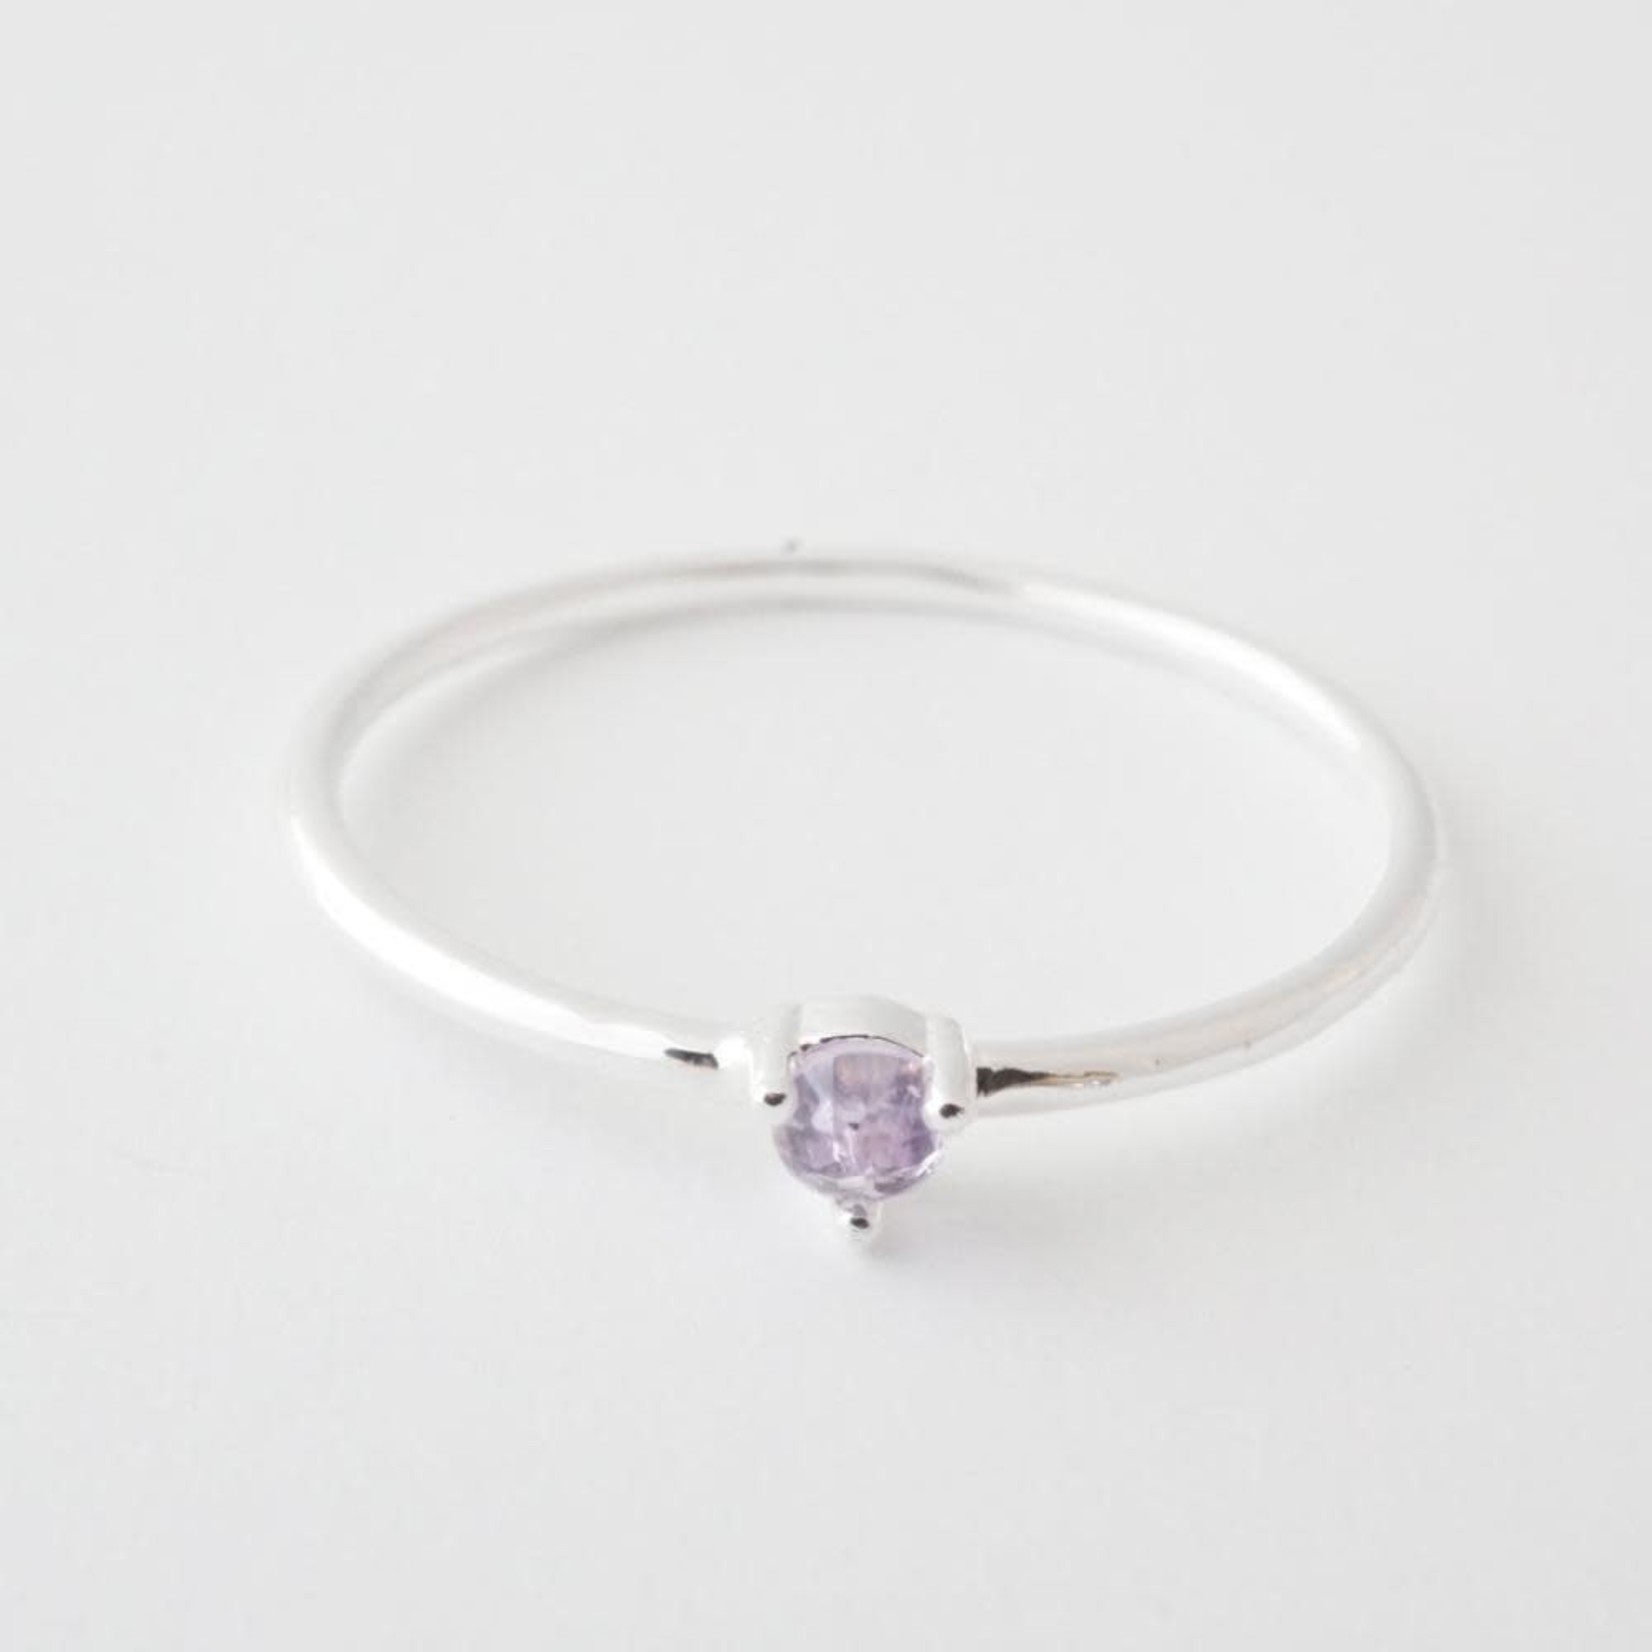 Honeycat Jewelry Honeycat Point Solitaire Ring AMETHYST Silver